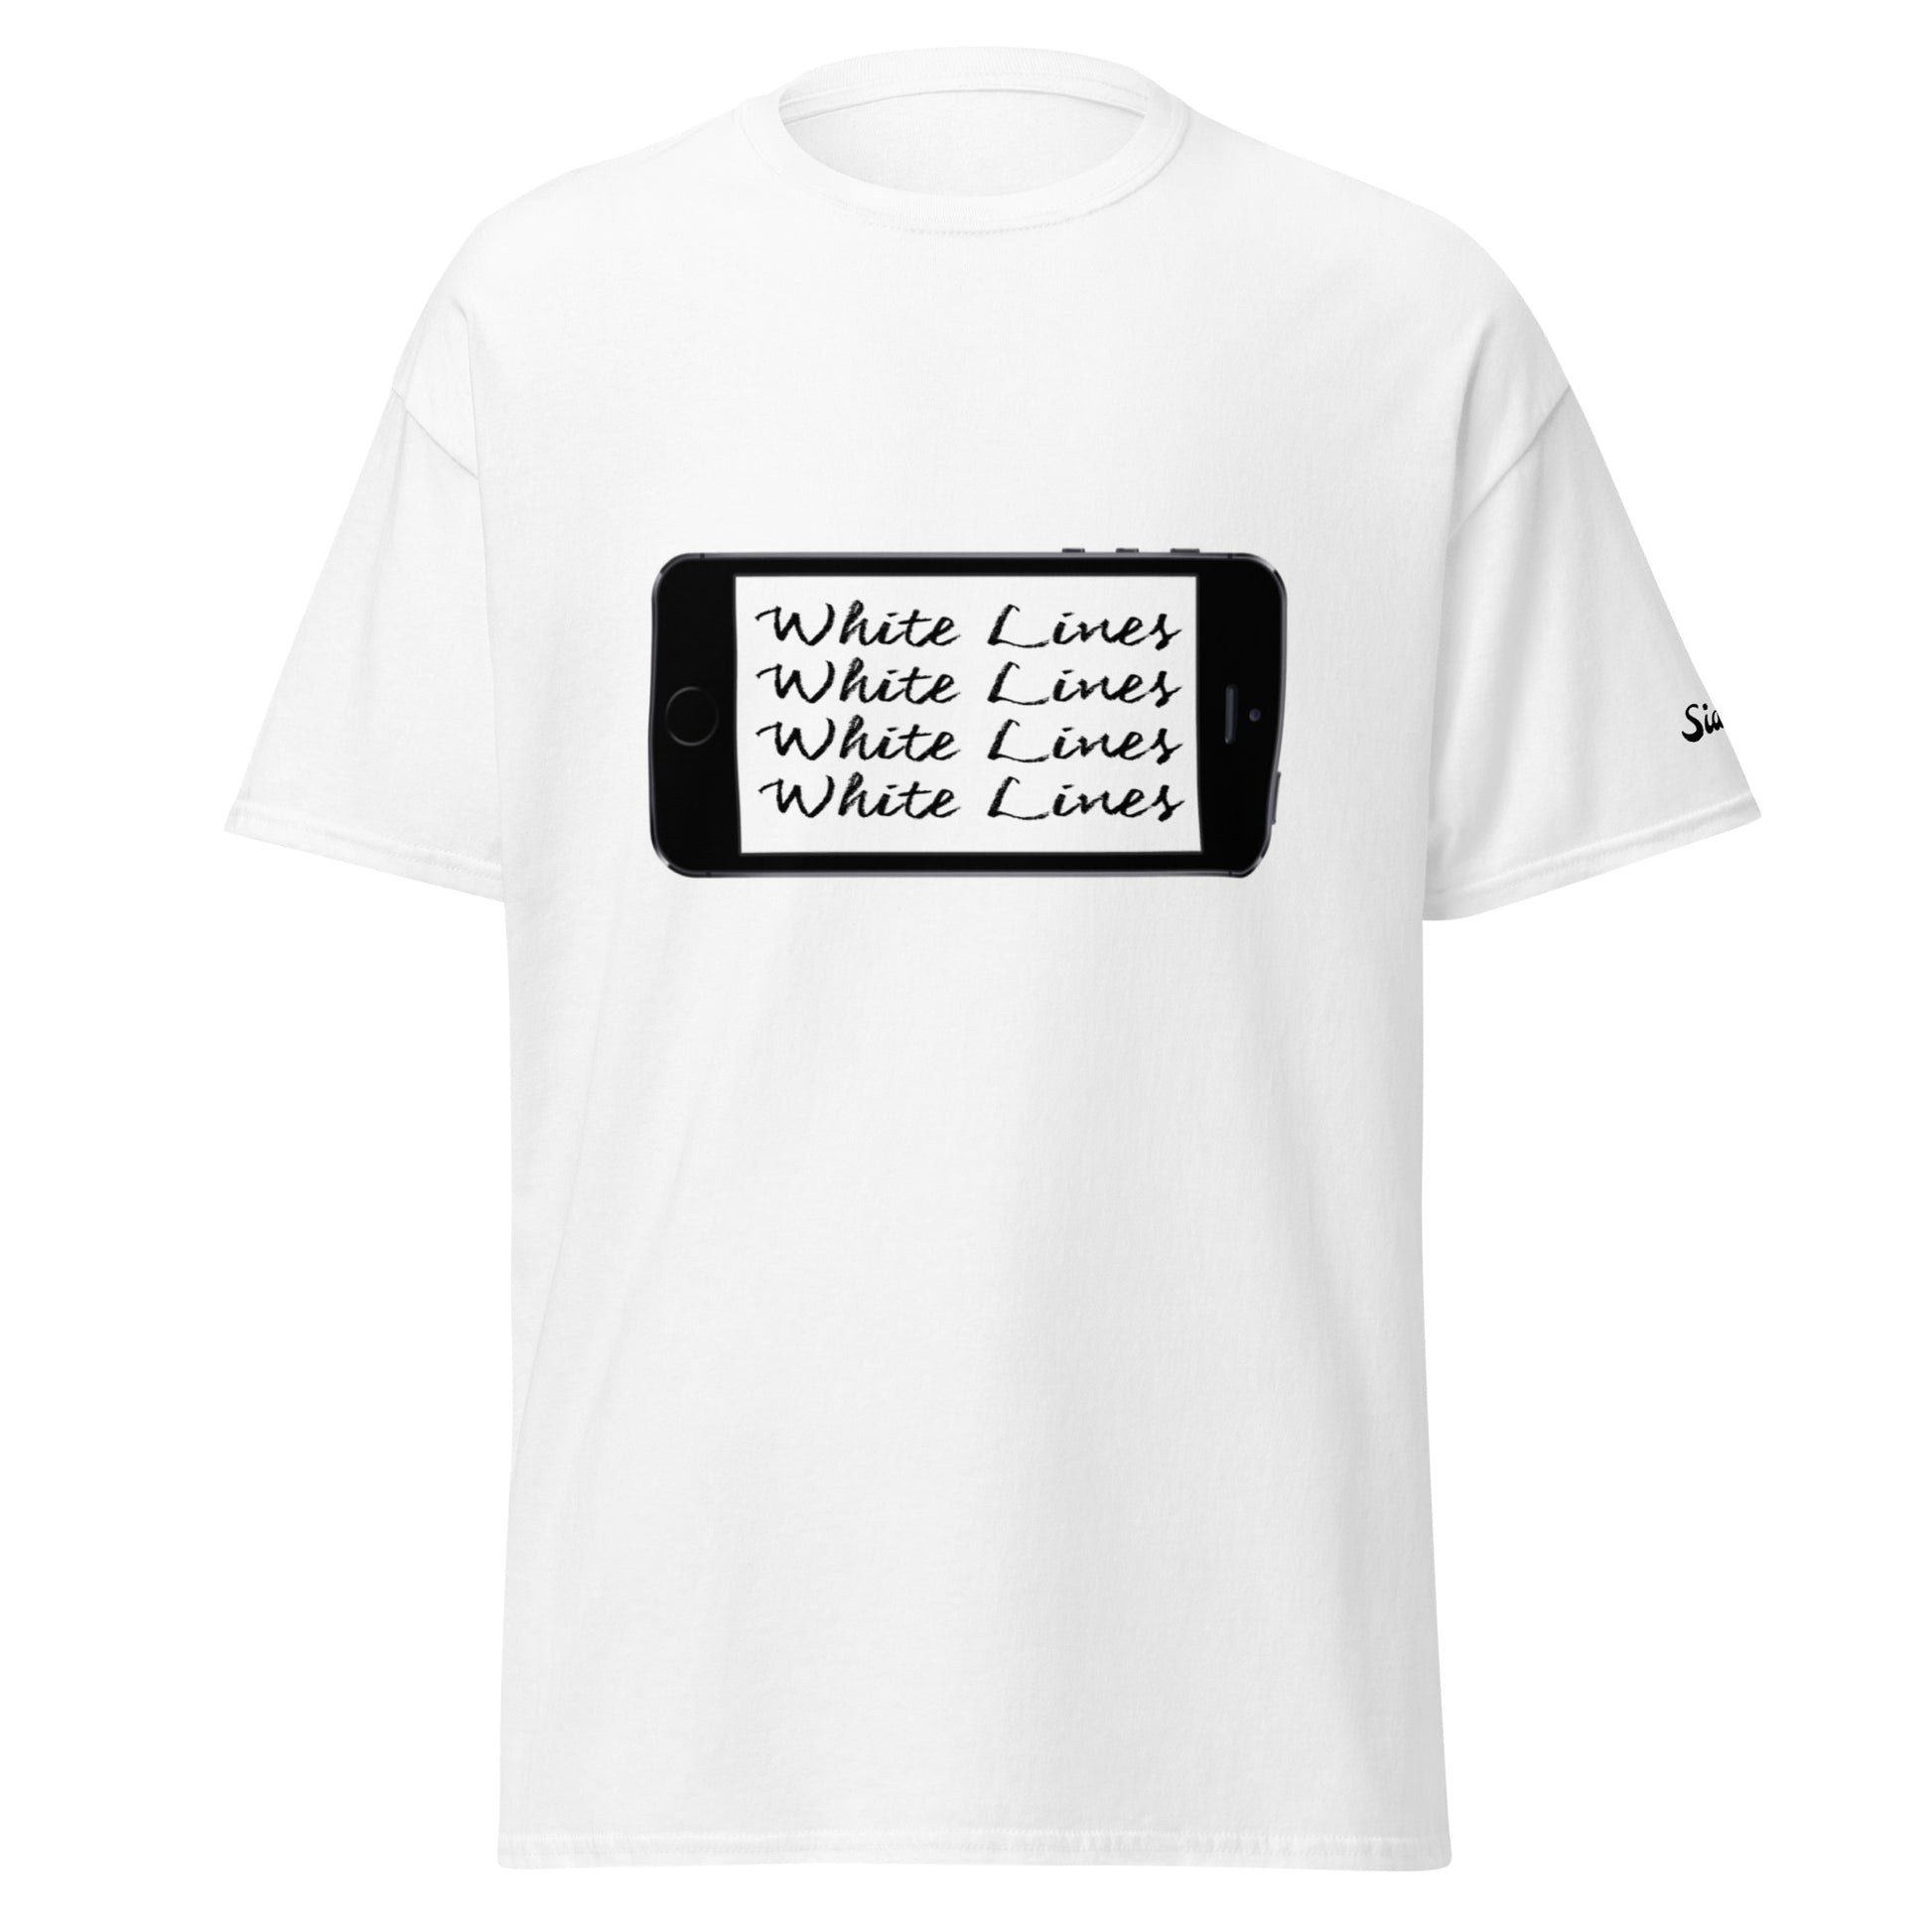 Siddy White Lines Men’s Classic Tee - T Shirt